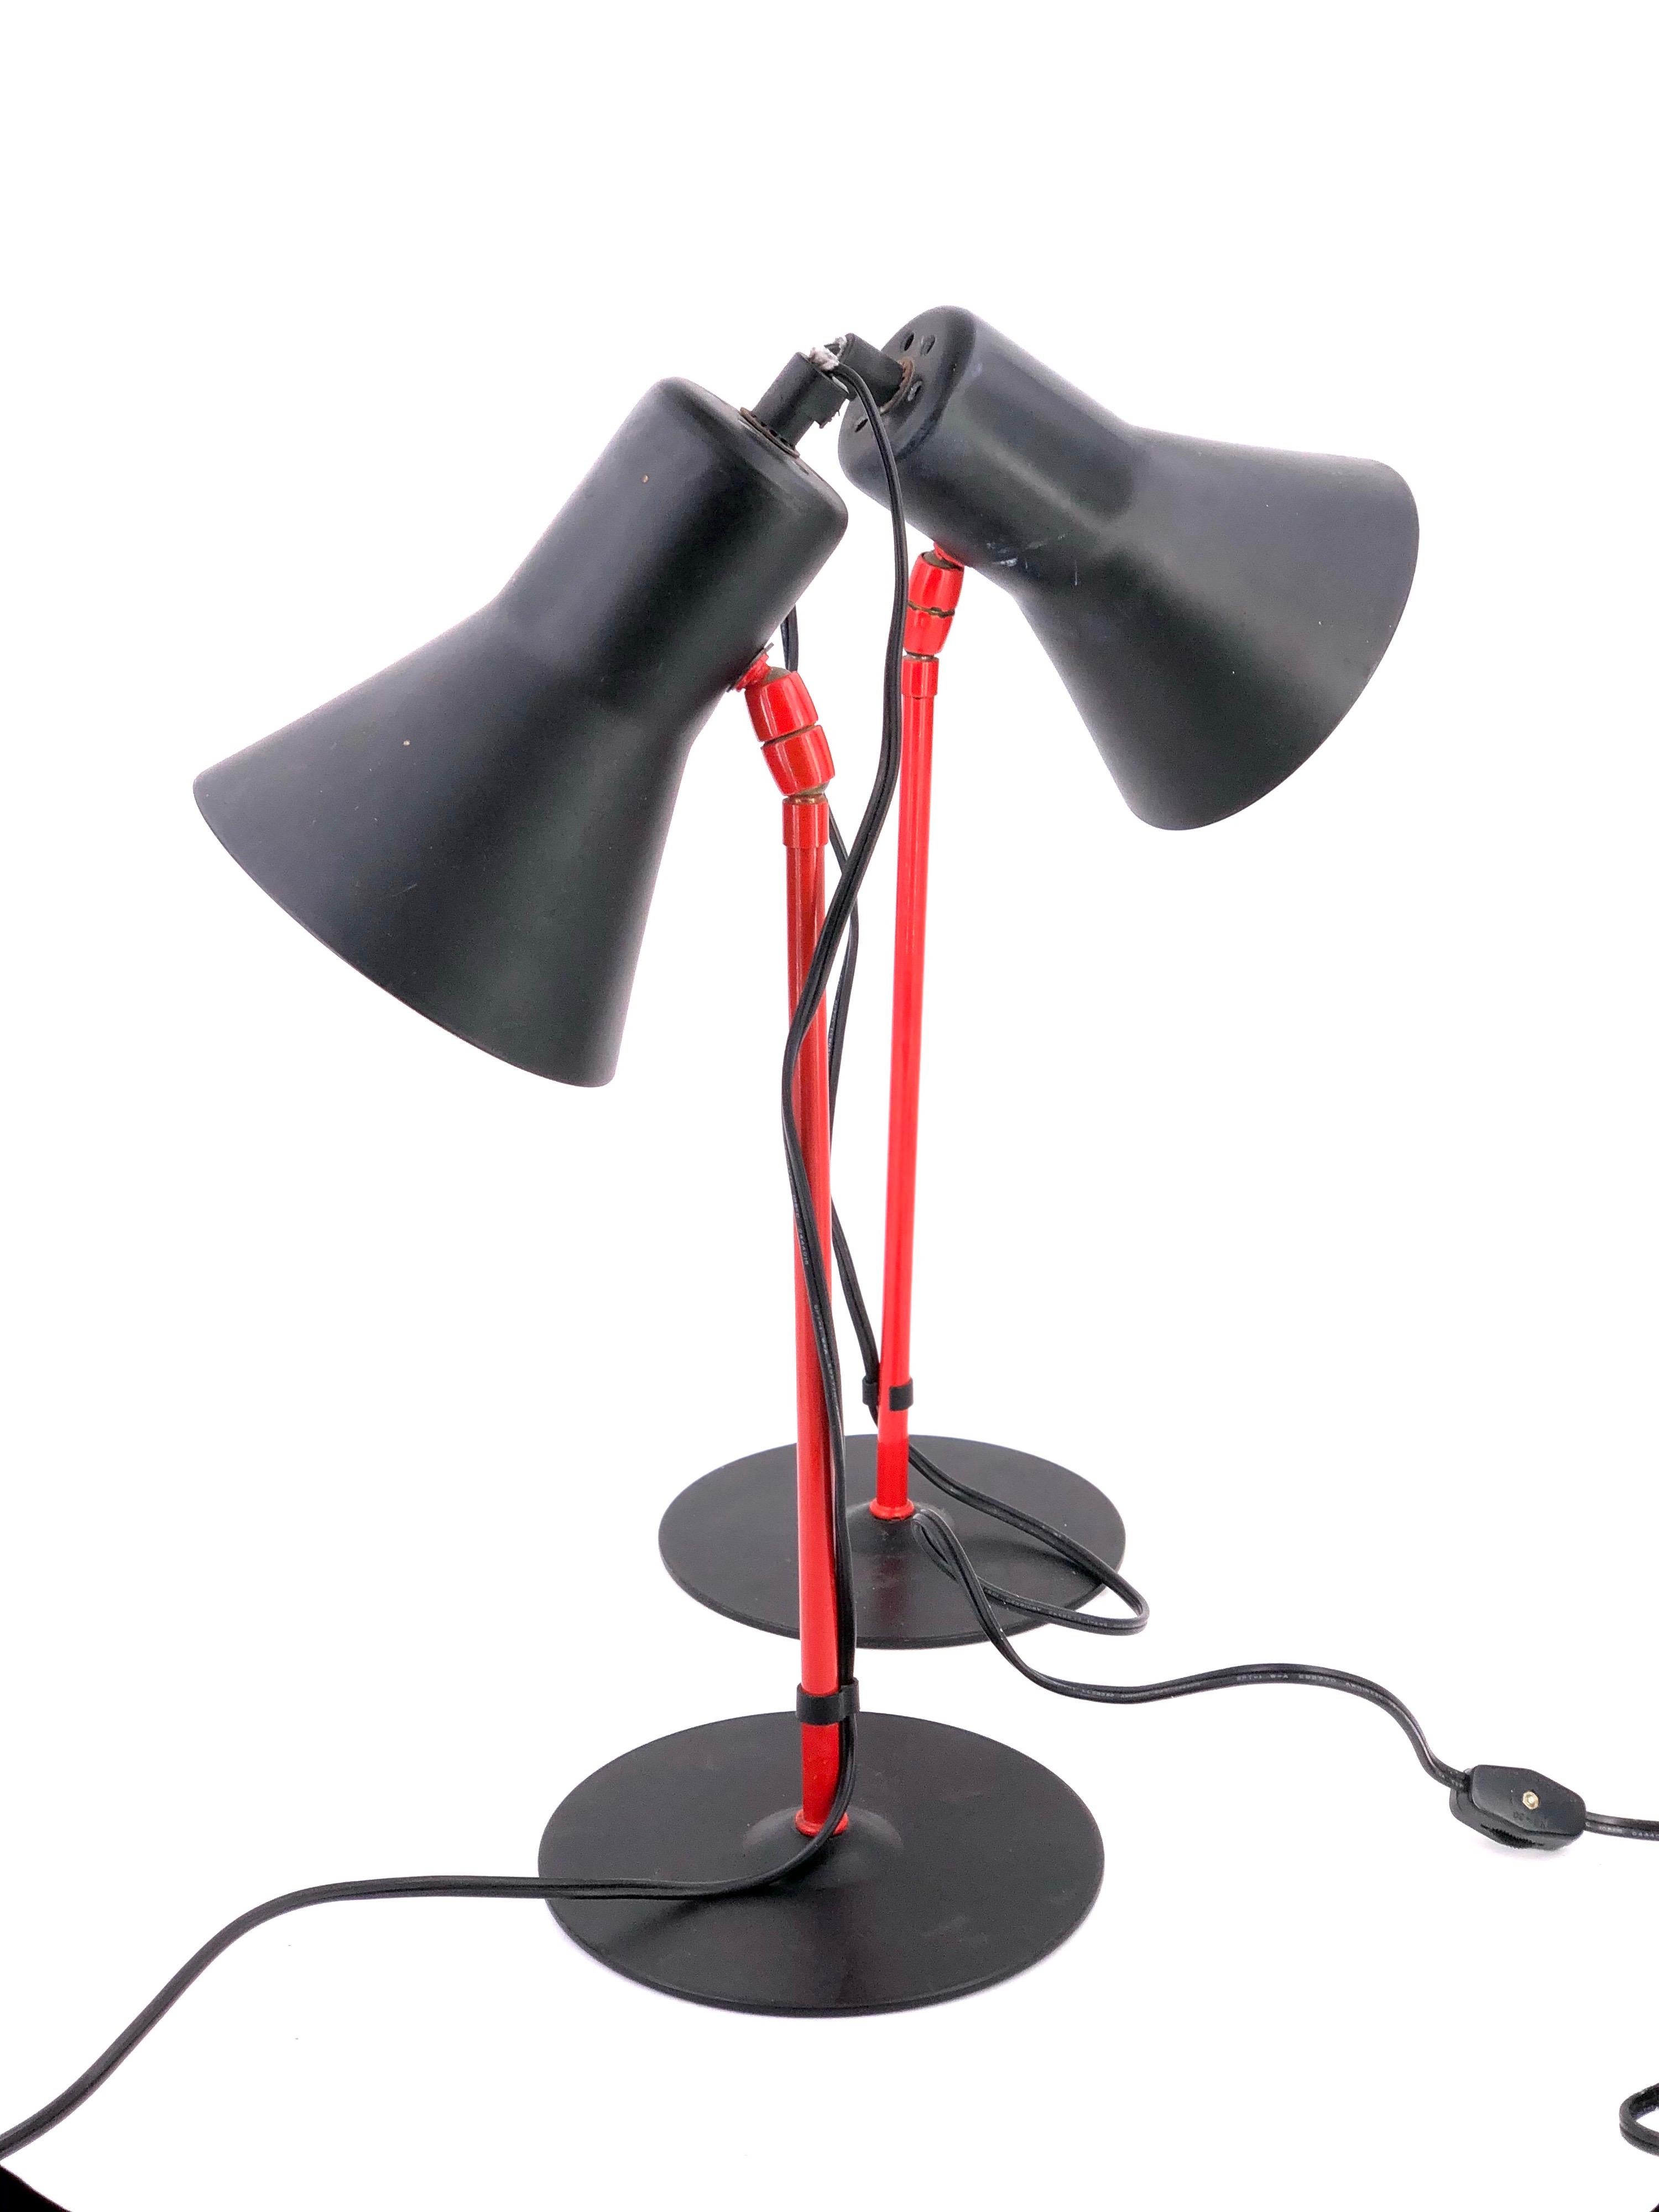 A rare pair of 1980s table desk lamps by Veneta Lumi, Italy multidirectional lampshade in black and red metal enameled finish, versatile and unique stamped at the bottom and in working condition. Great for that Memphis era decor.